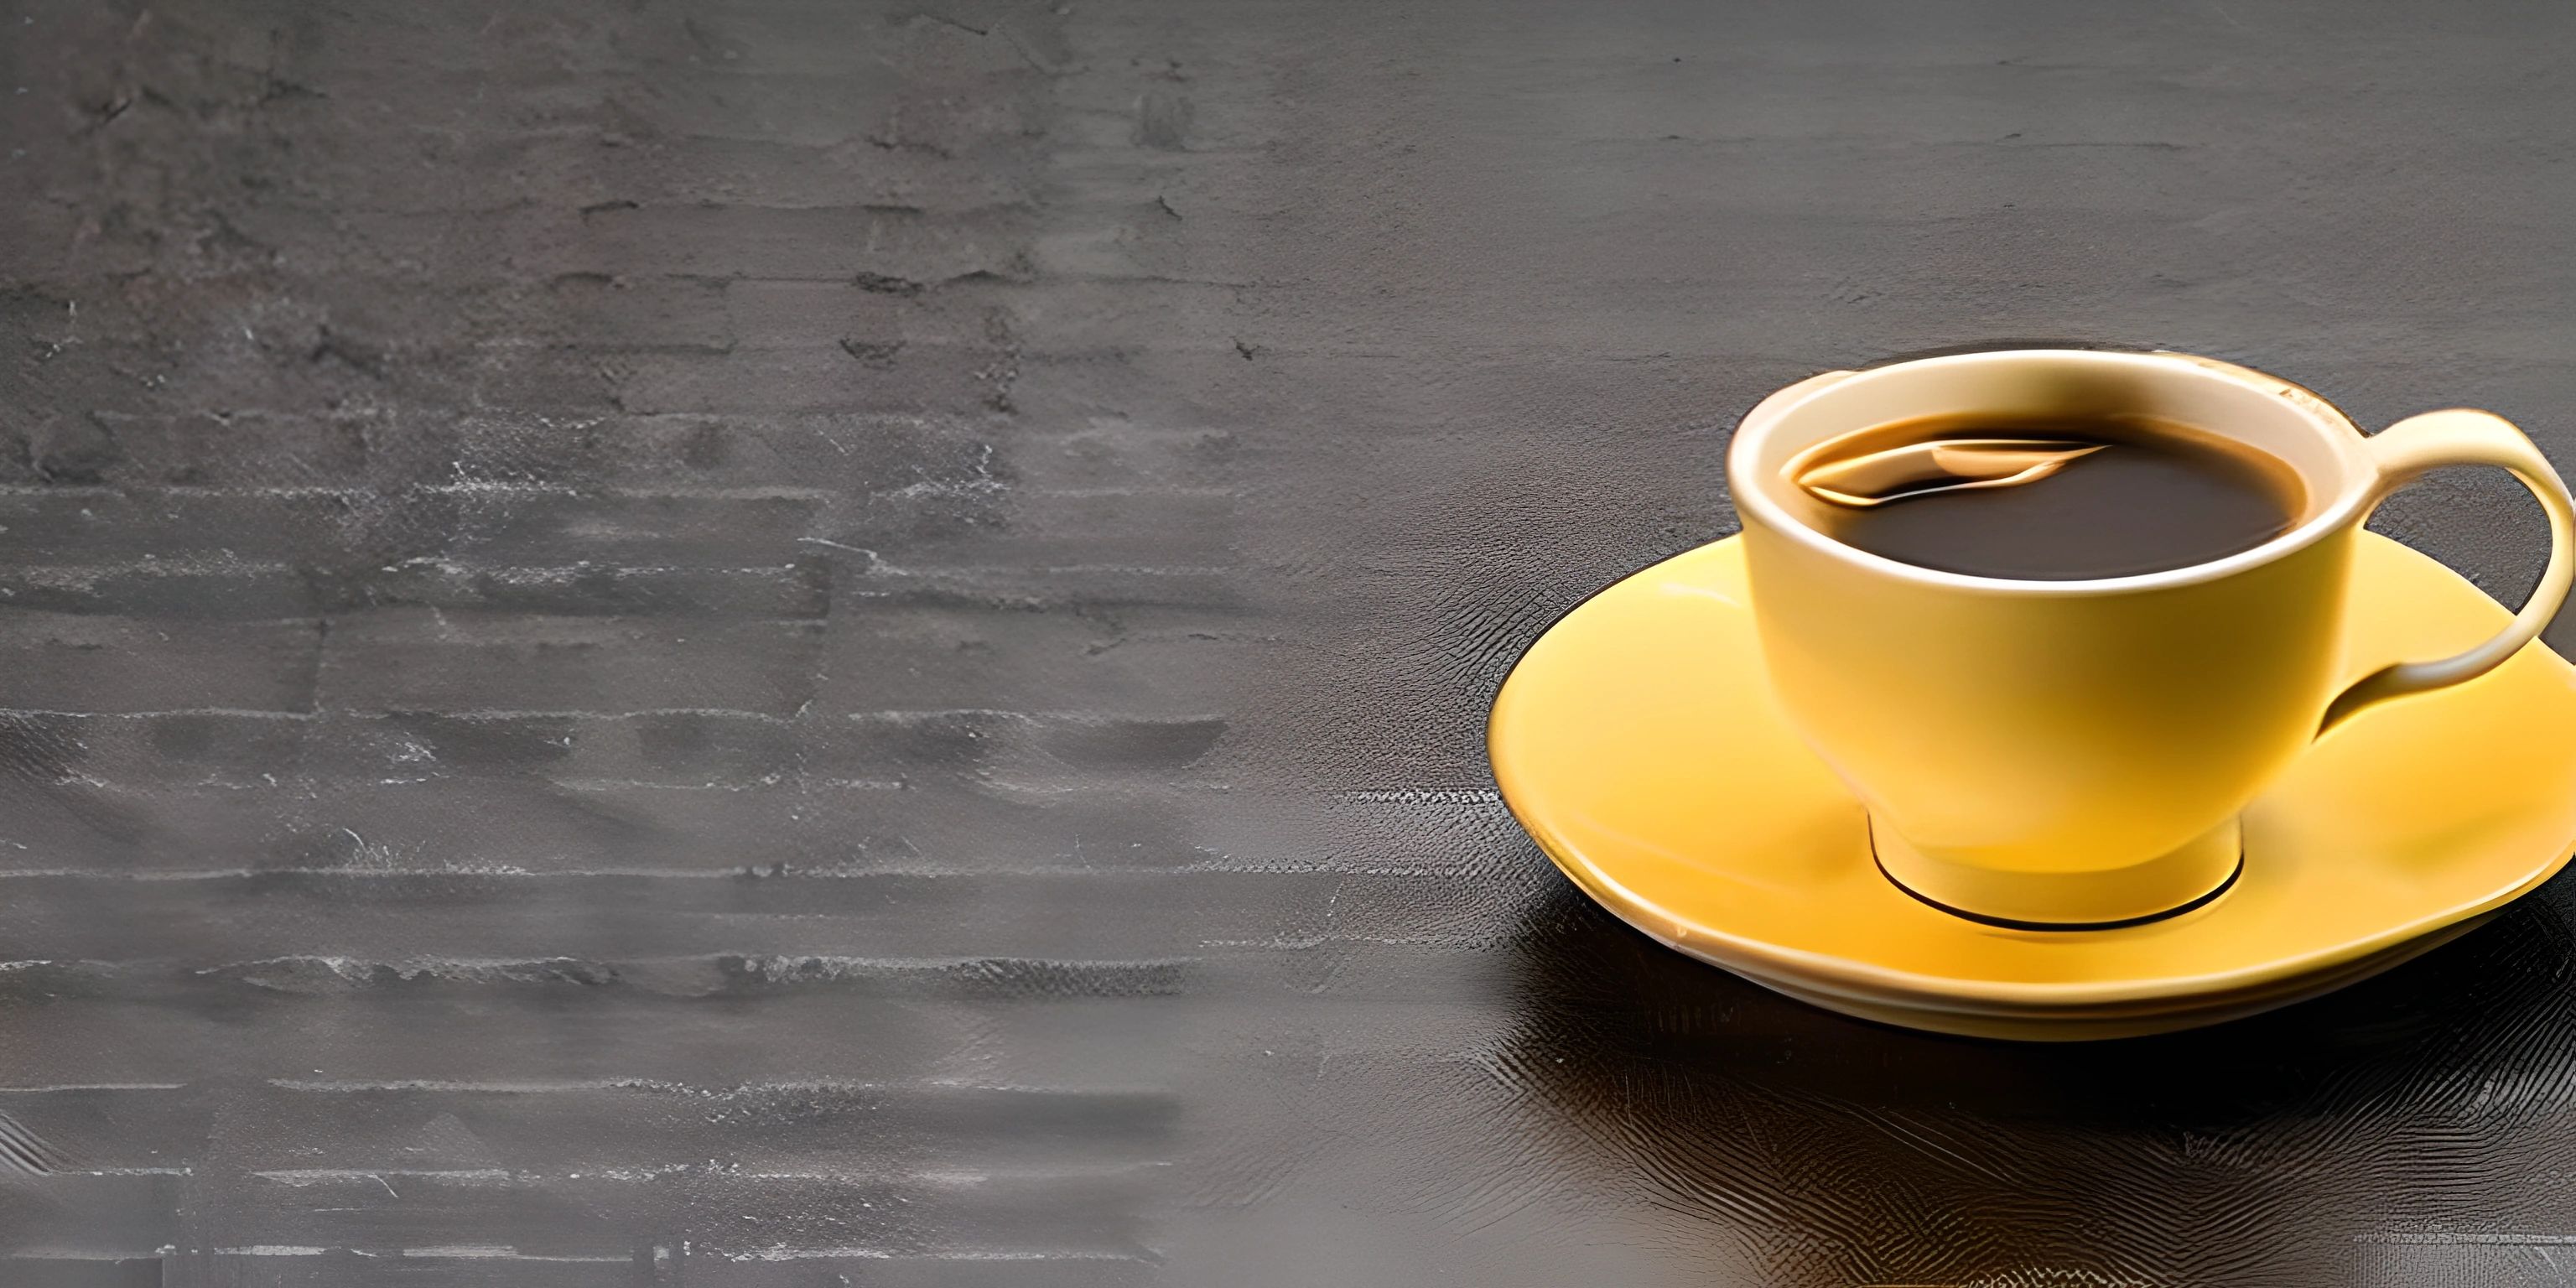 a yellow coffee cup with a saucer on it on a black table with textured surface